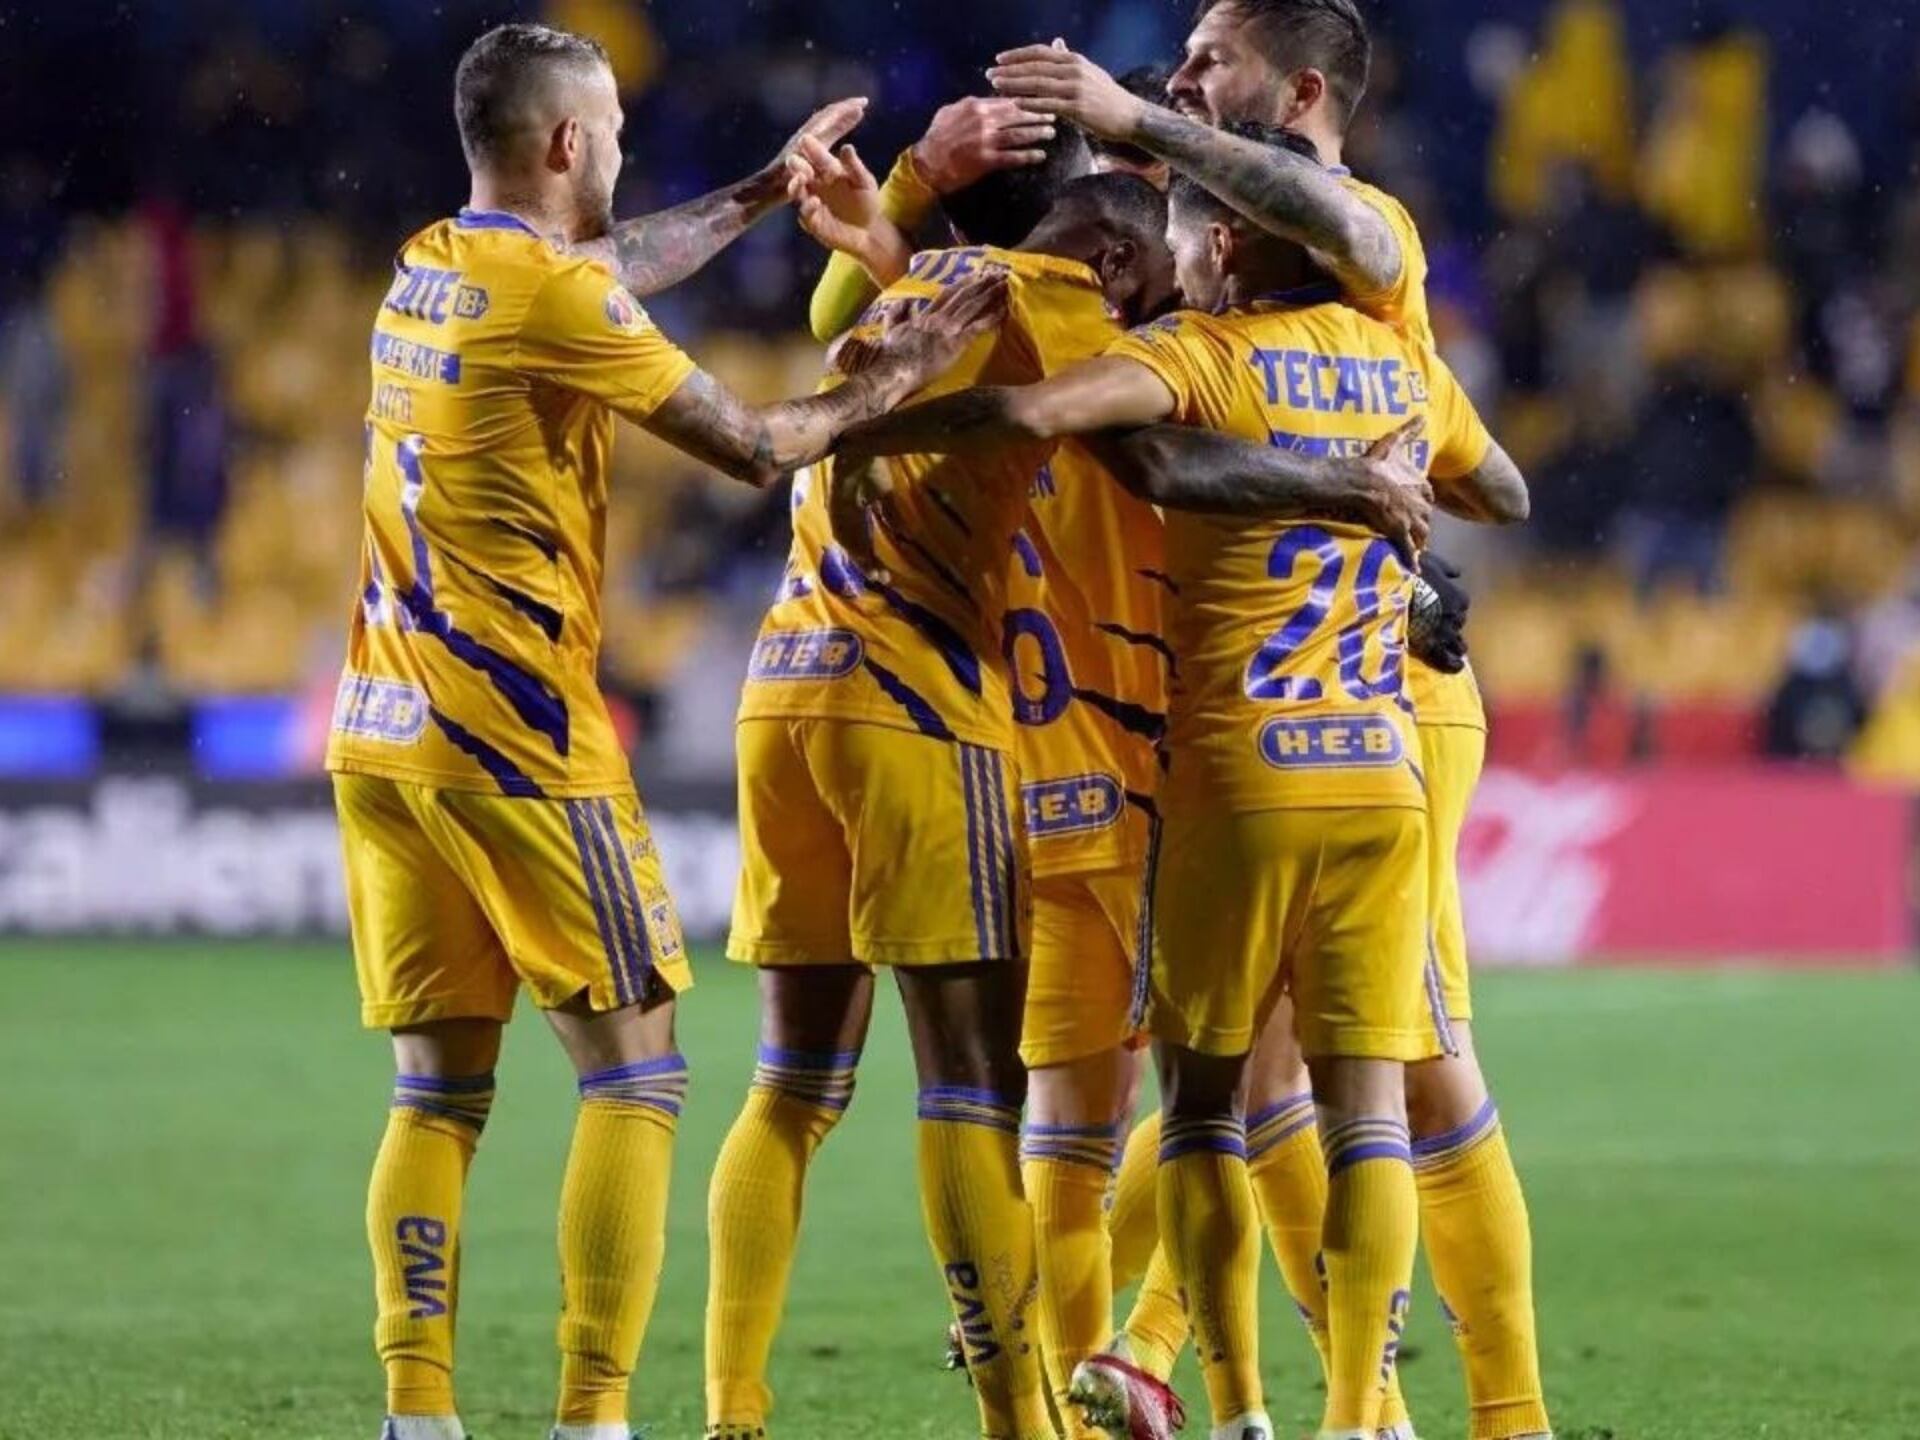 Even after the victory, this player might lose his starting role with Tigres